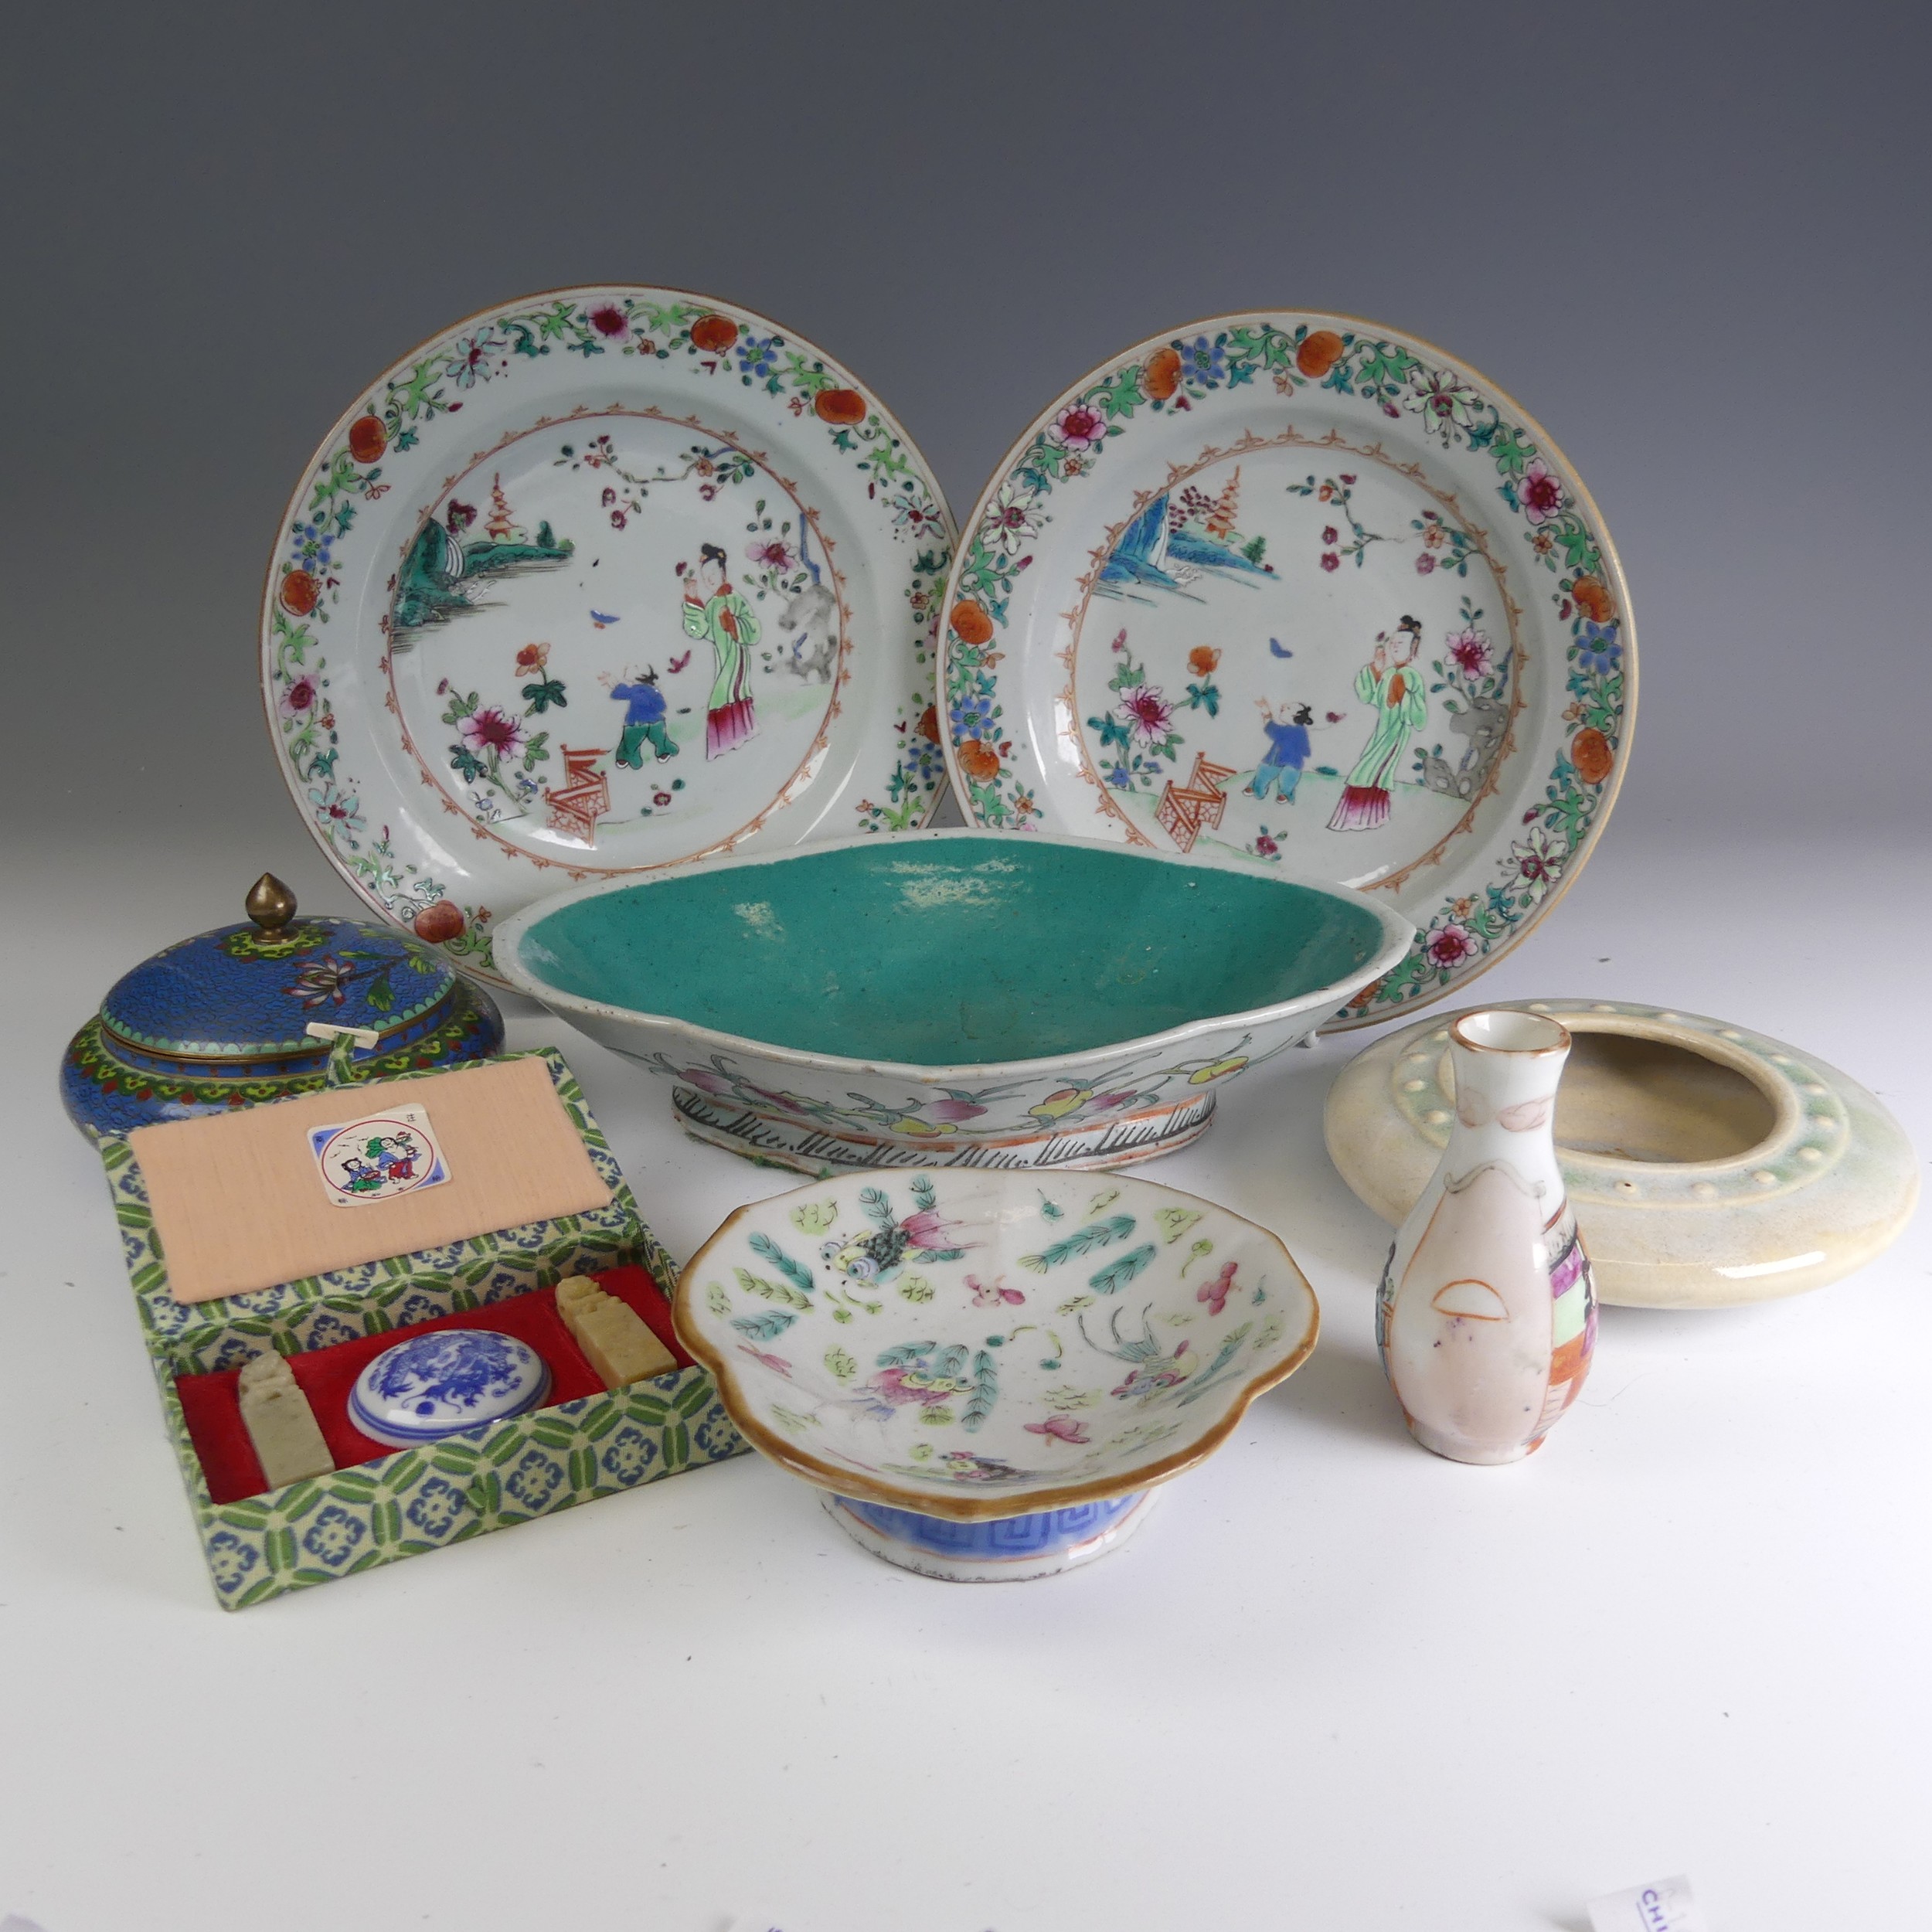 A pair of 19thC Chinese famille rose porcelain Plates, decorated in typical style with colourful